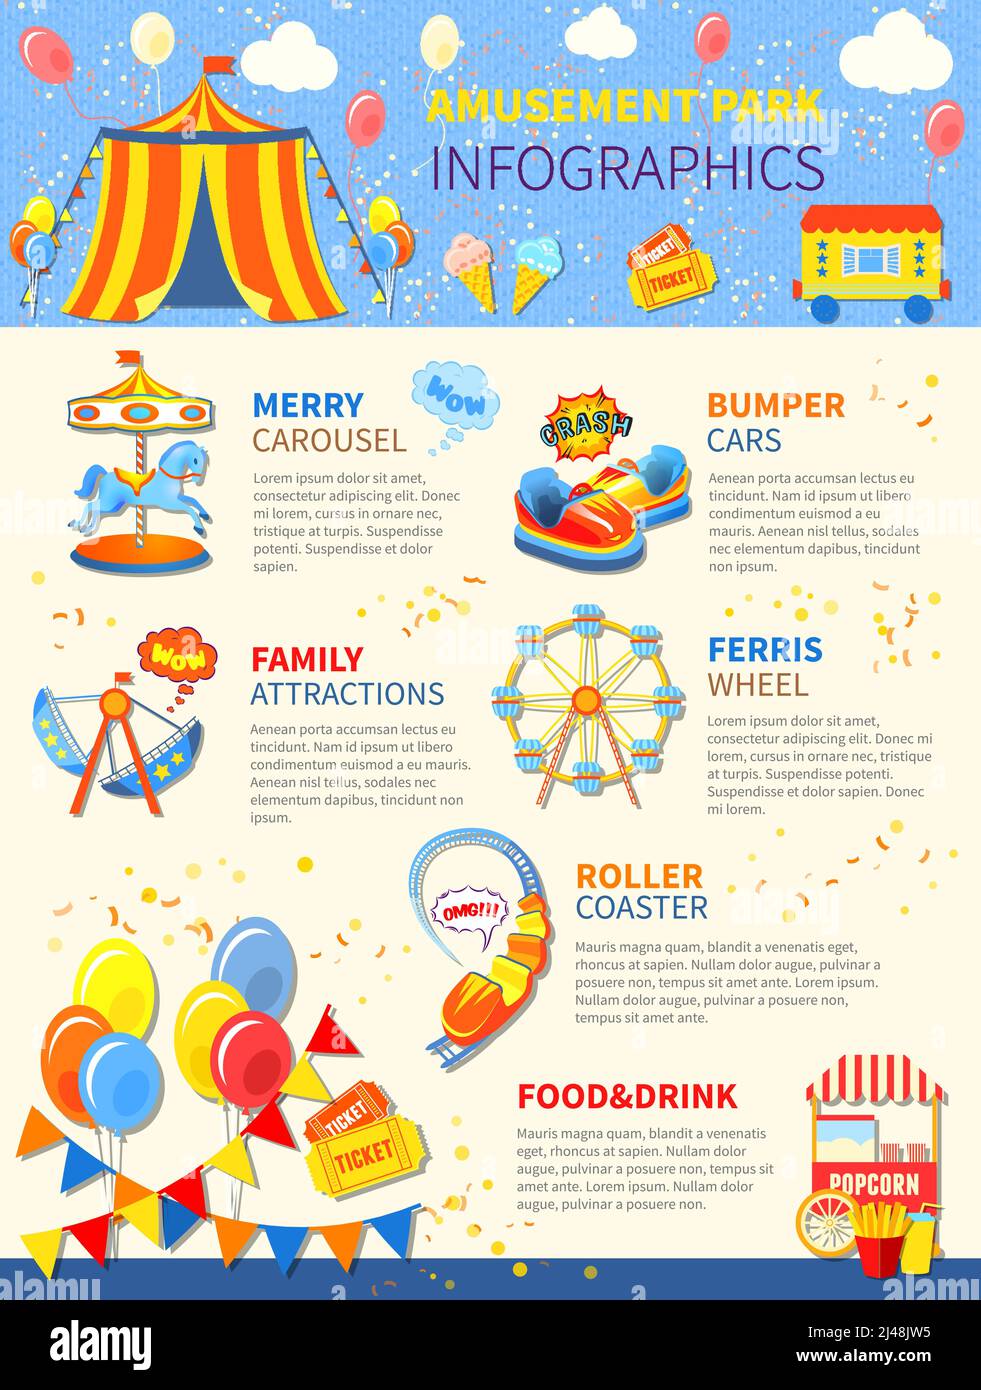 Amusement park infographics layout with carousel and attractions vector illustration Stock Vector